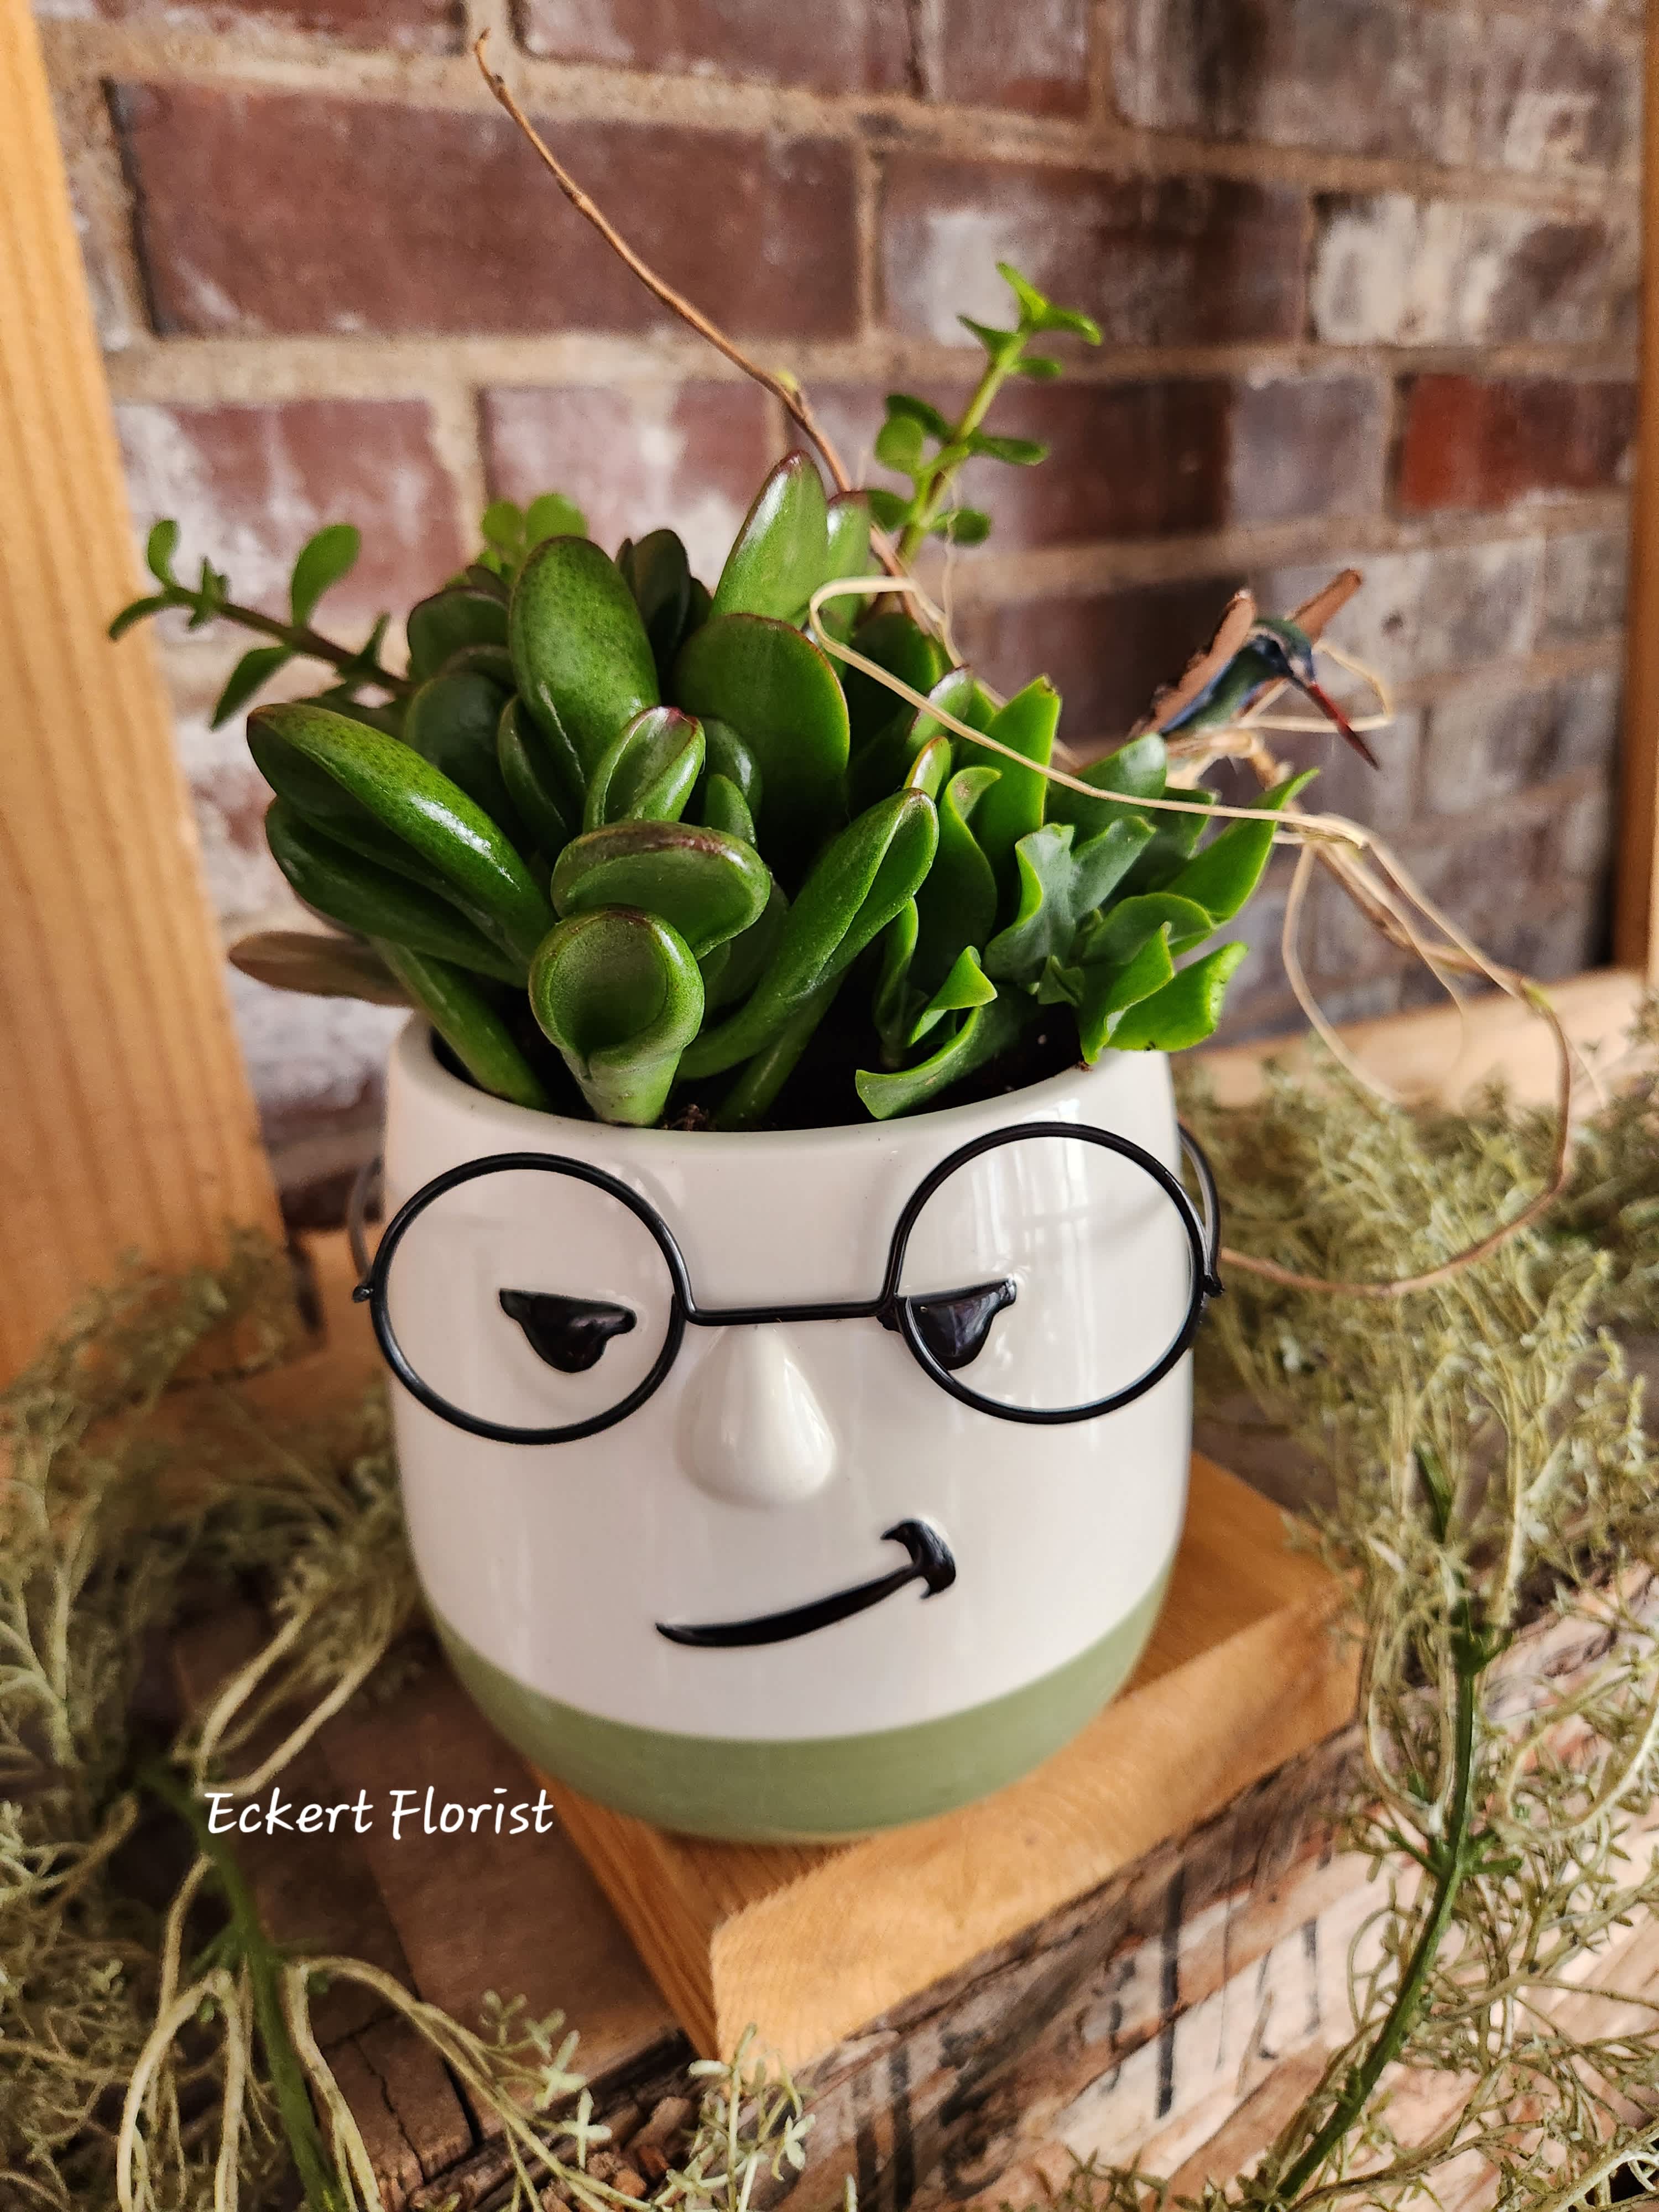 Eckert Florist's Expression Face Succulent Planter *OUR LOCAL DELIVERY ONLY - How cute is this? Filled with live succulent plants, this planter will arrive with our signature bird and twigs. Each planter is unique so expressions on face, bottom color of pot, and succulents themselves may vary. *Our Local Delivery Only 